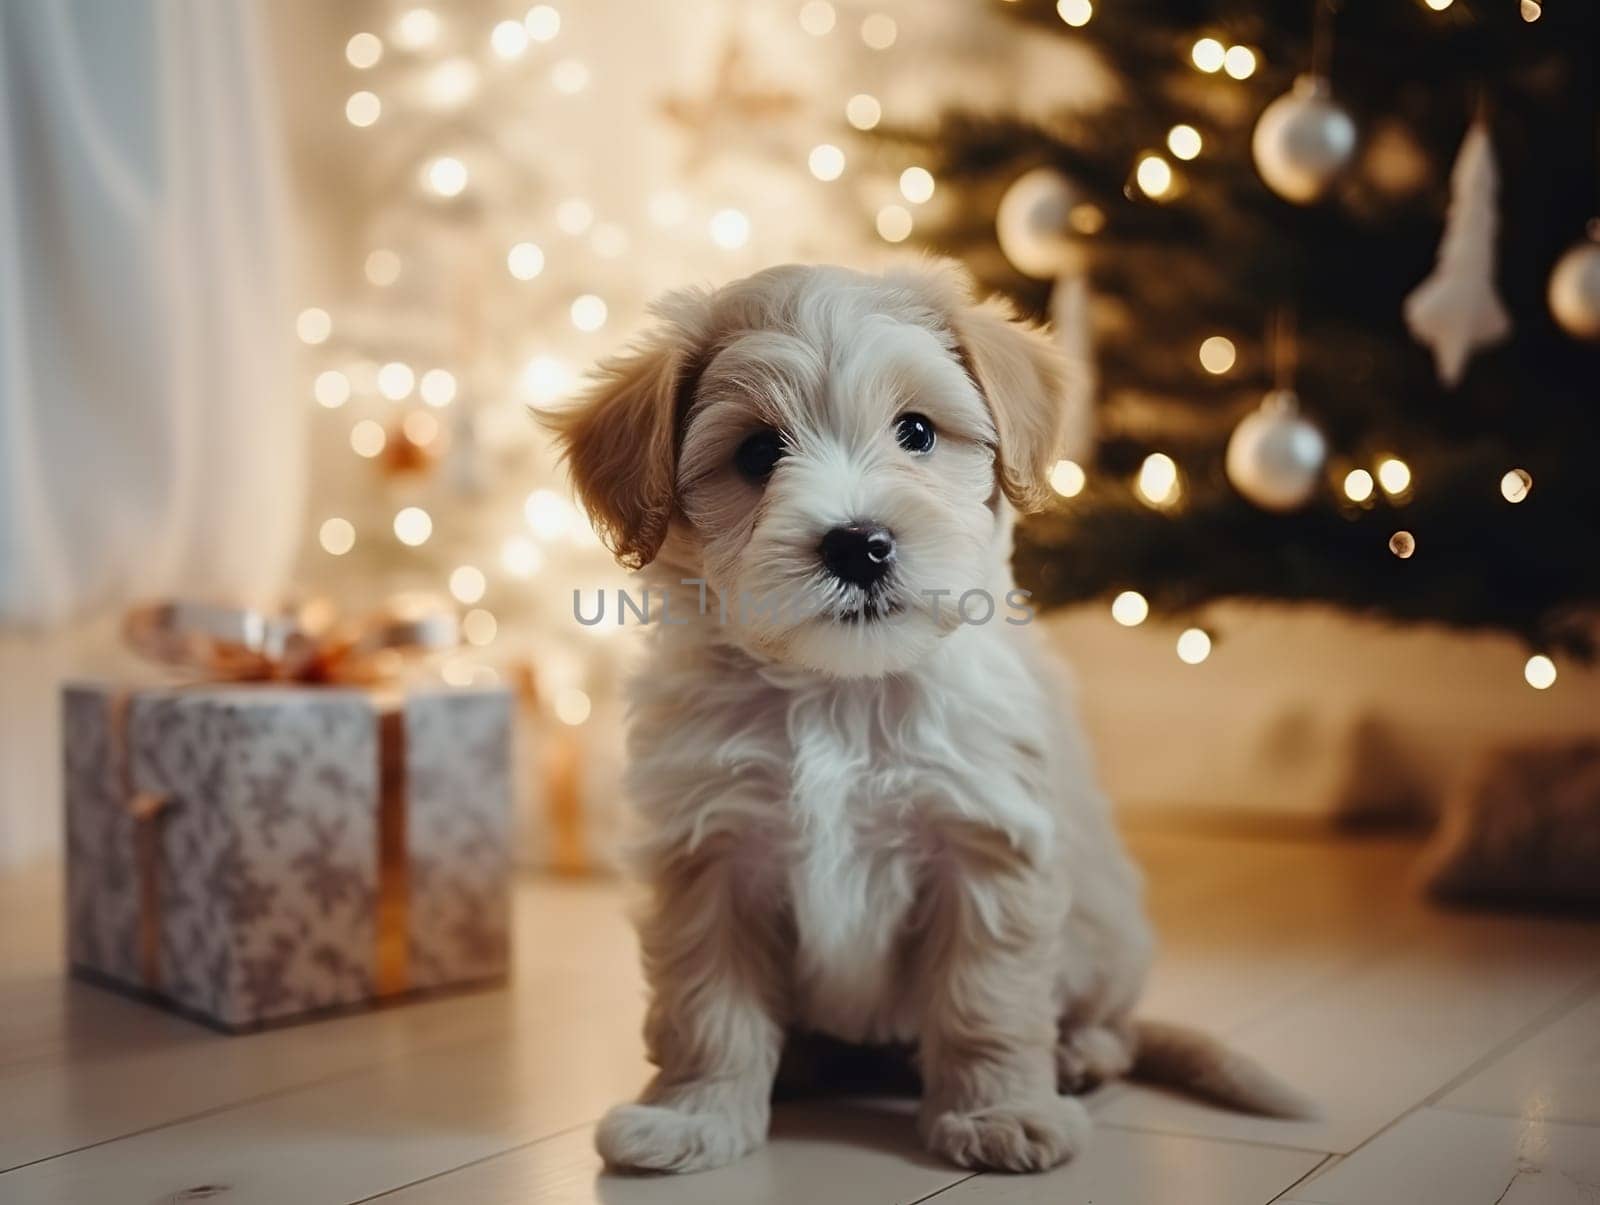 Puppy Sits Near Christmas Tree With Gifts In Room by GekaSkr